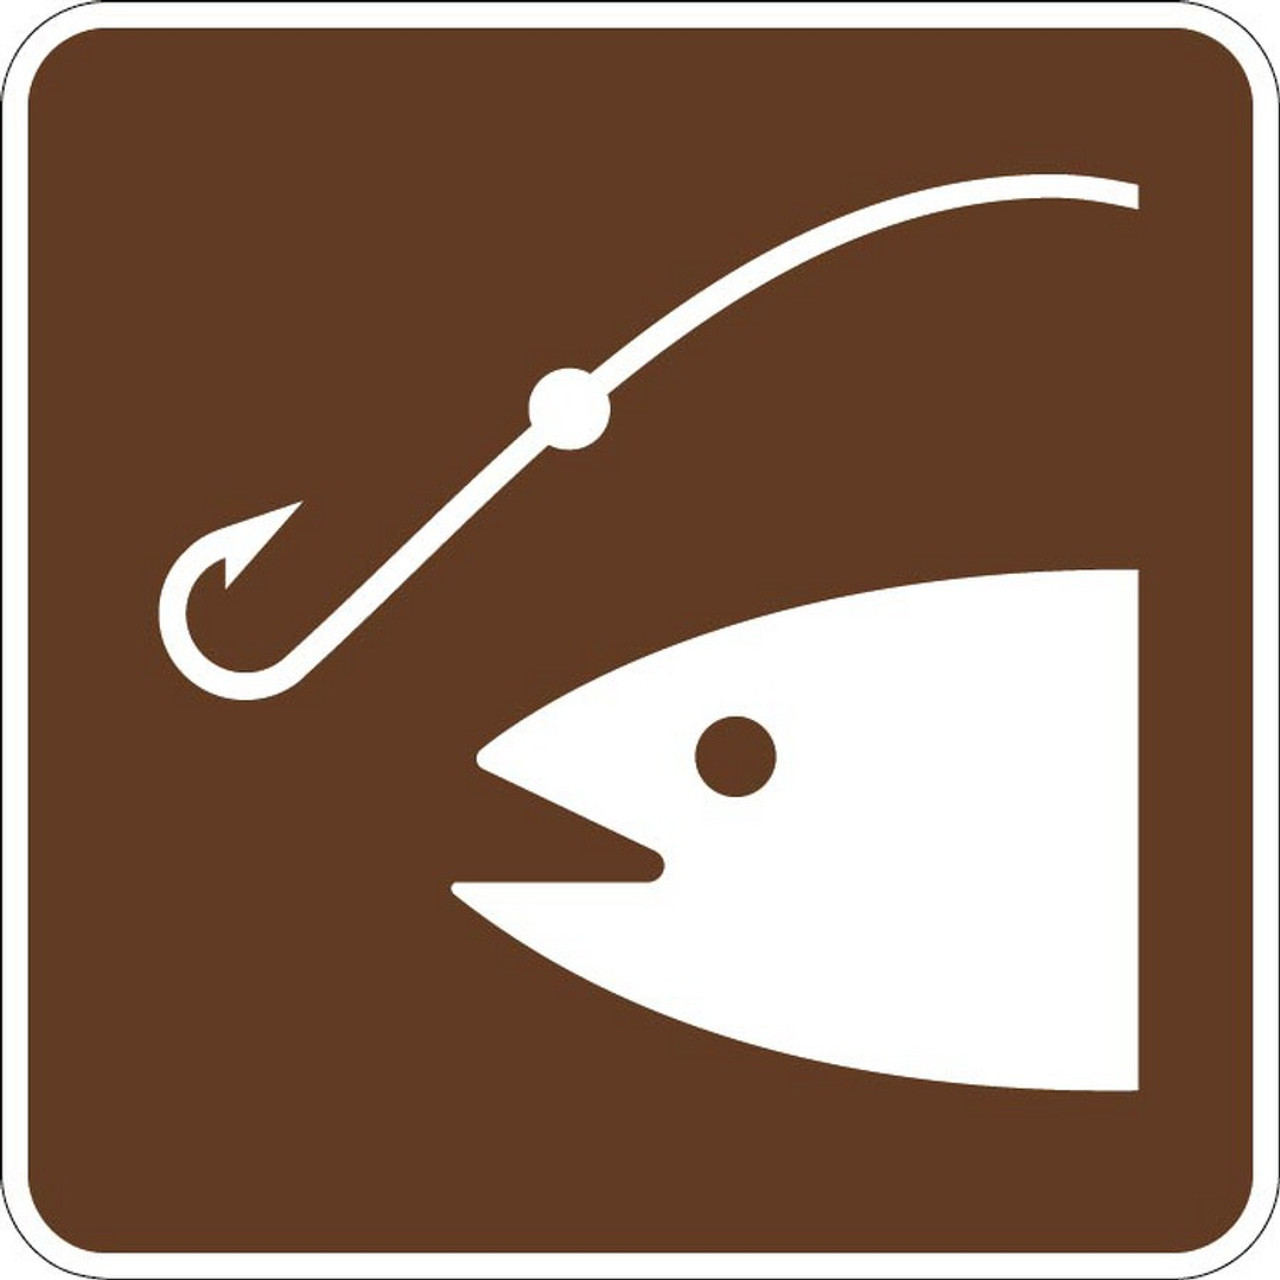 Fishing Area (Symbol) Sign RS-063 - NPS (National Park Service